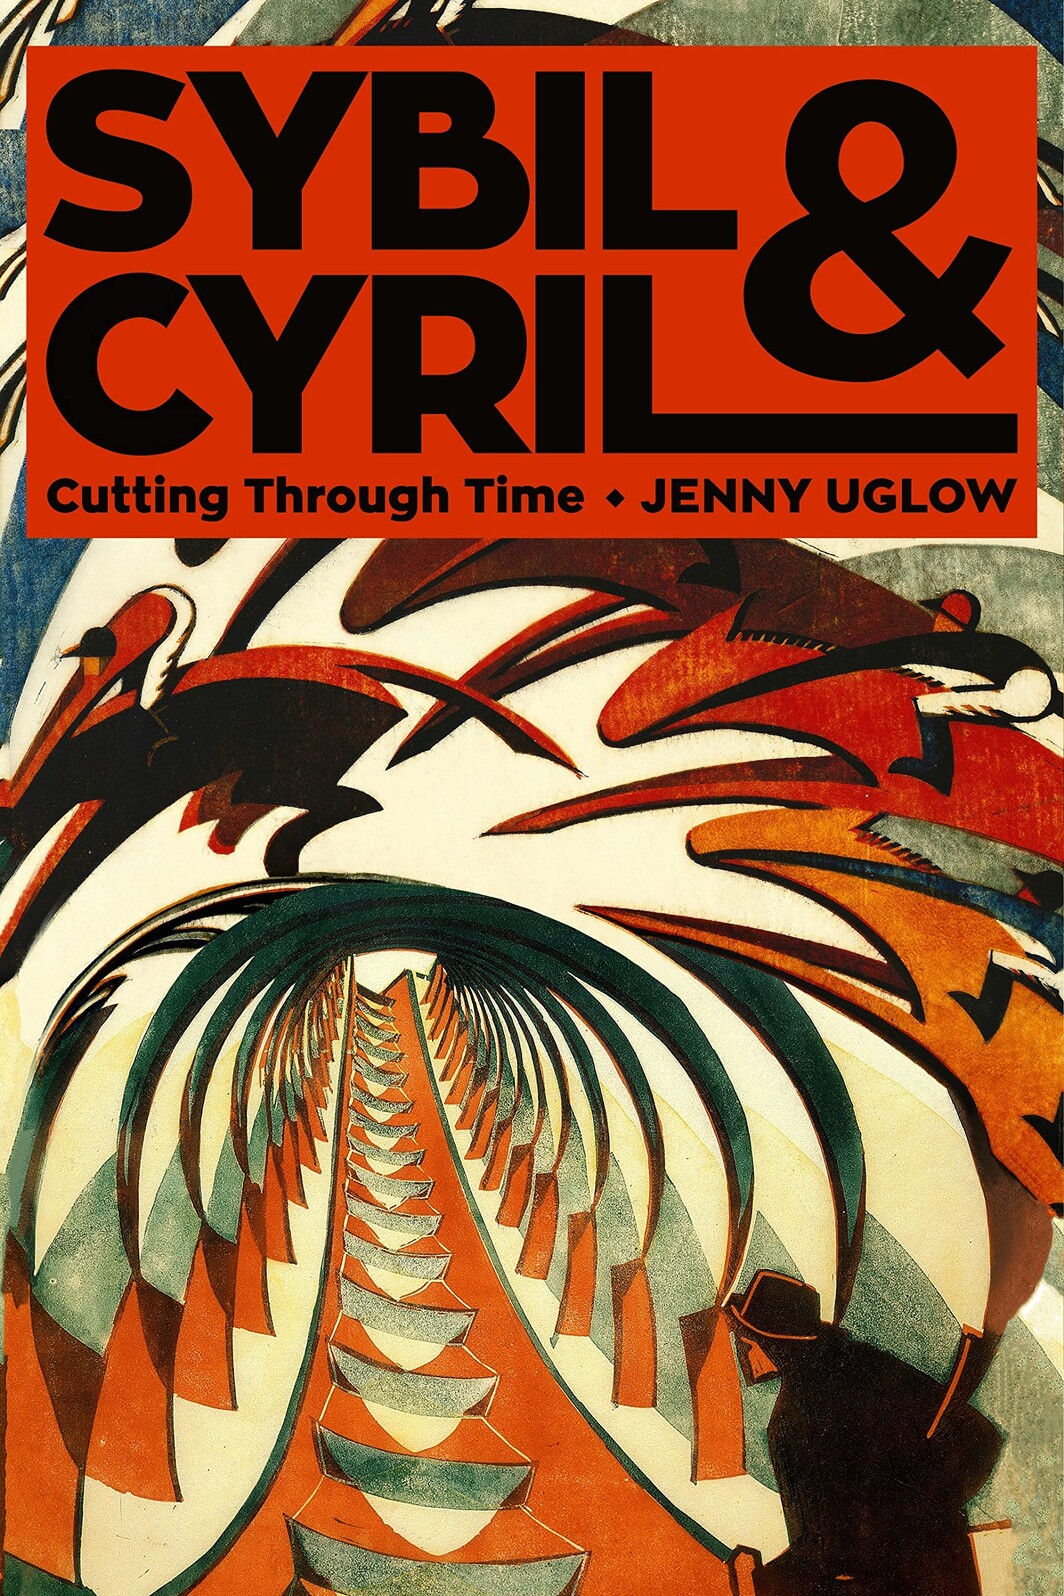 The cover of Sybil & Cyril: Cutting Through Time